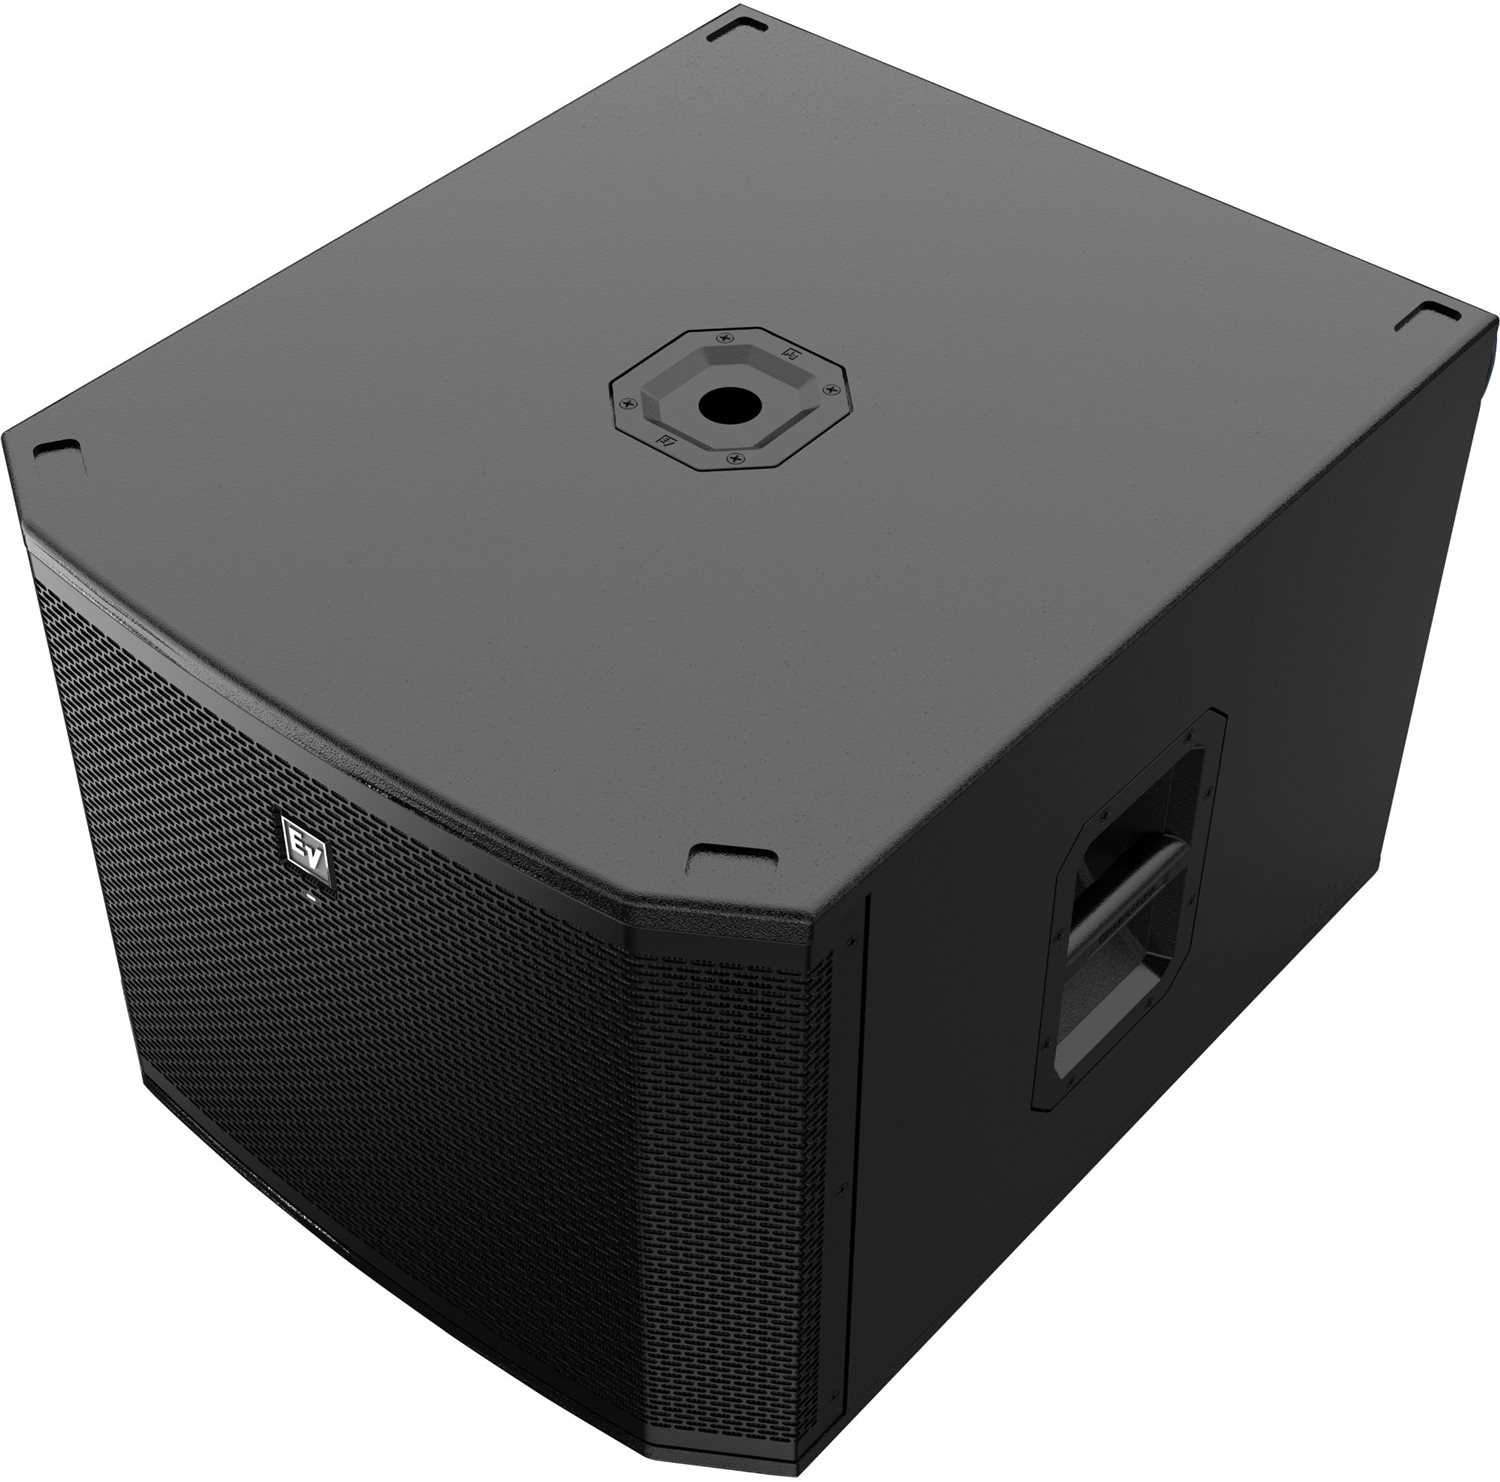 Electro Voice ETX-15SP 15 in Powered PA Subwoofer 1800W DSP - ProSound and Stage Lighting